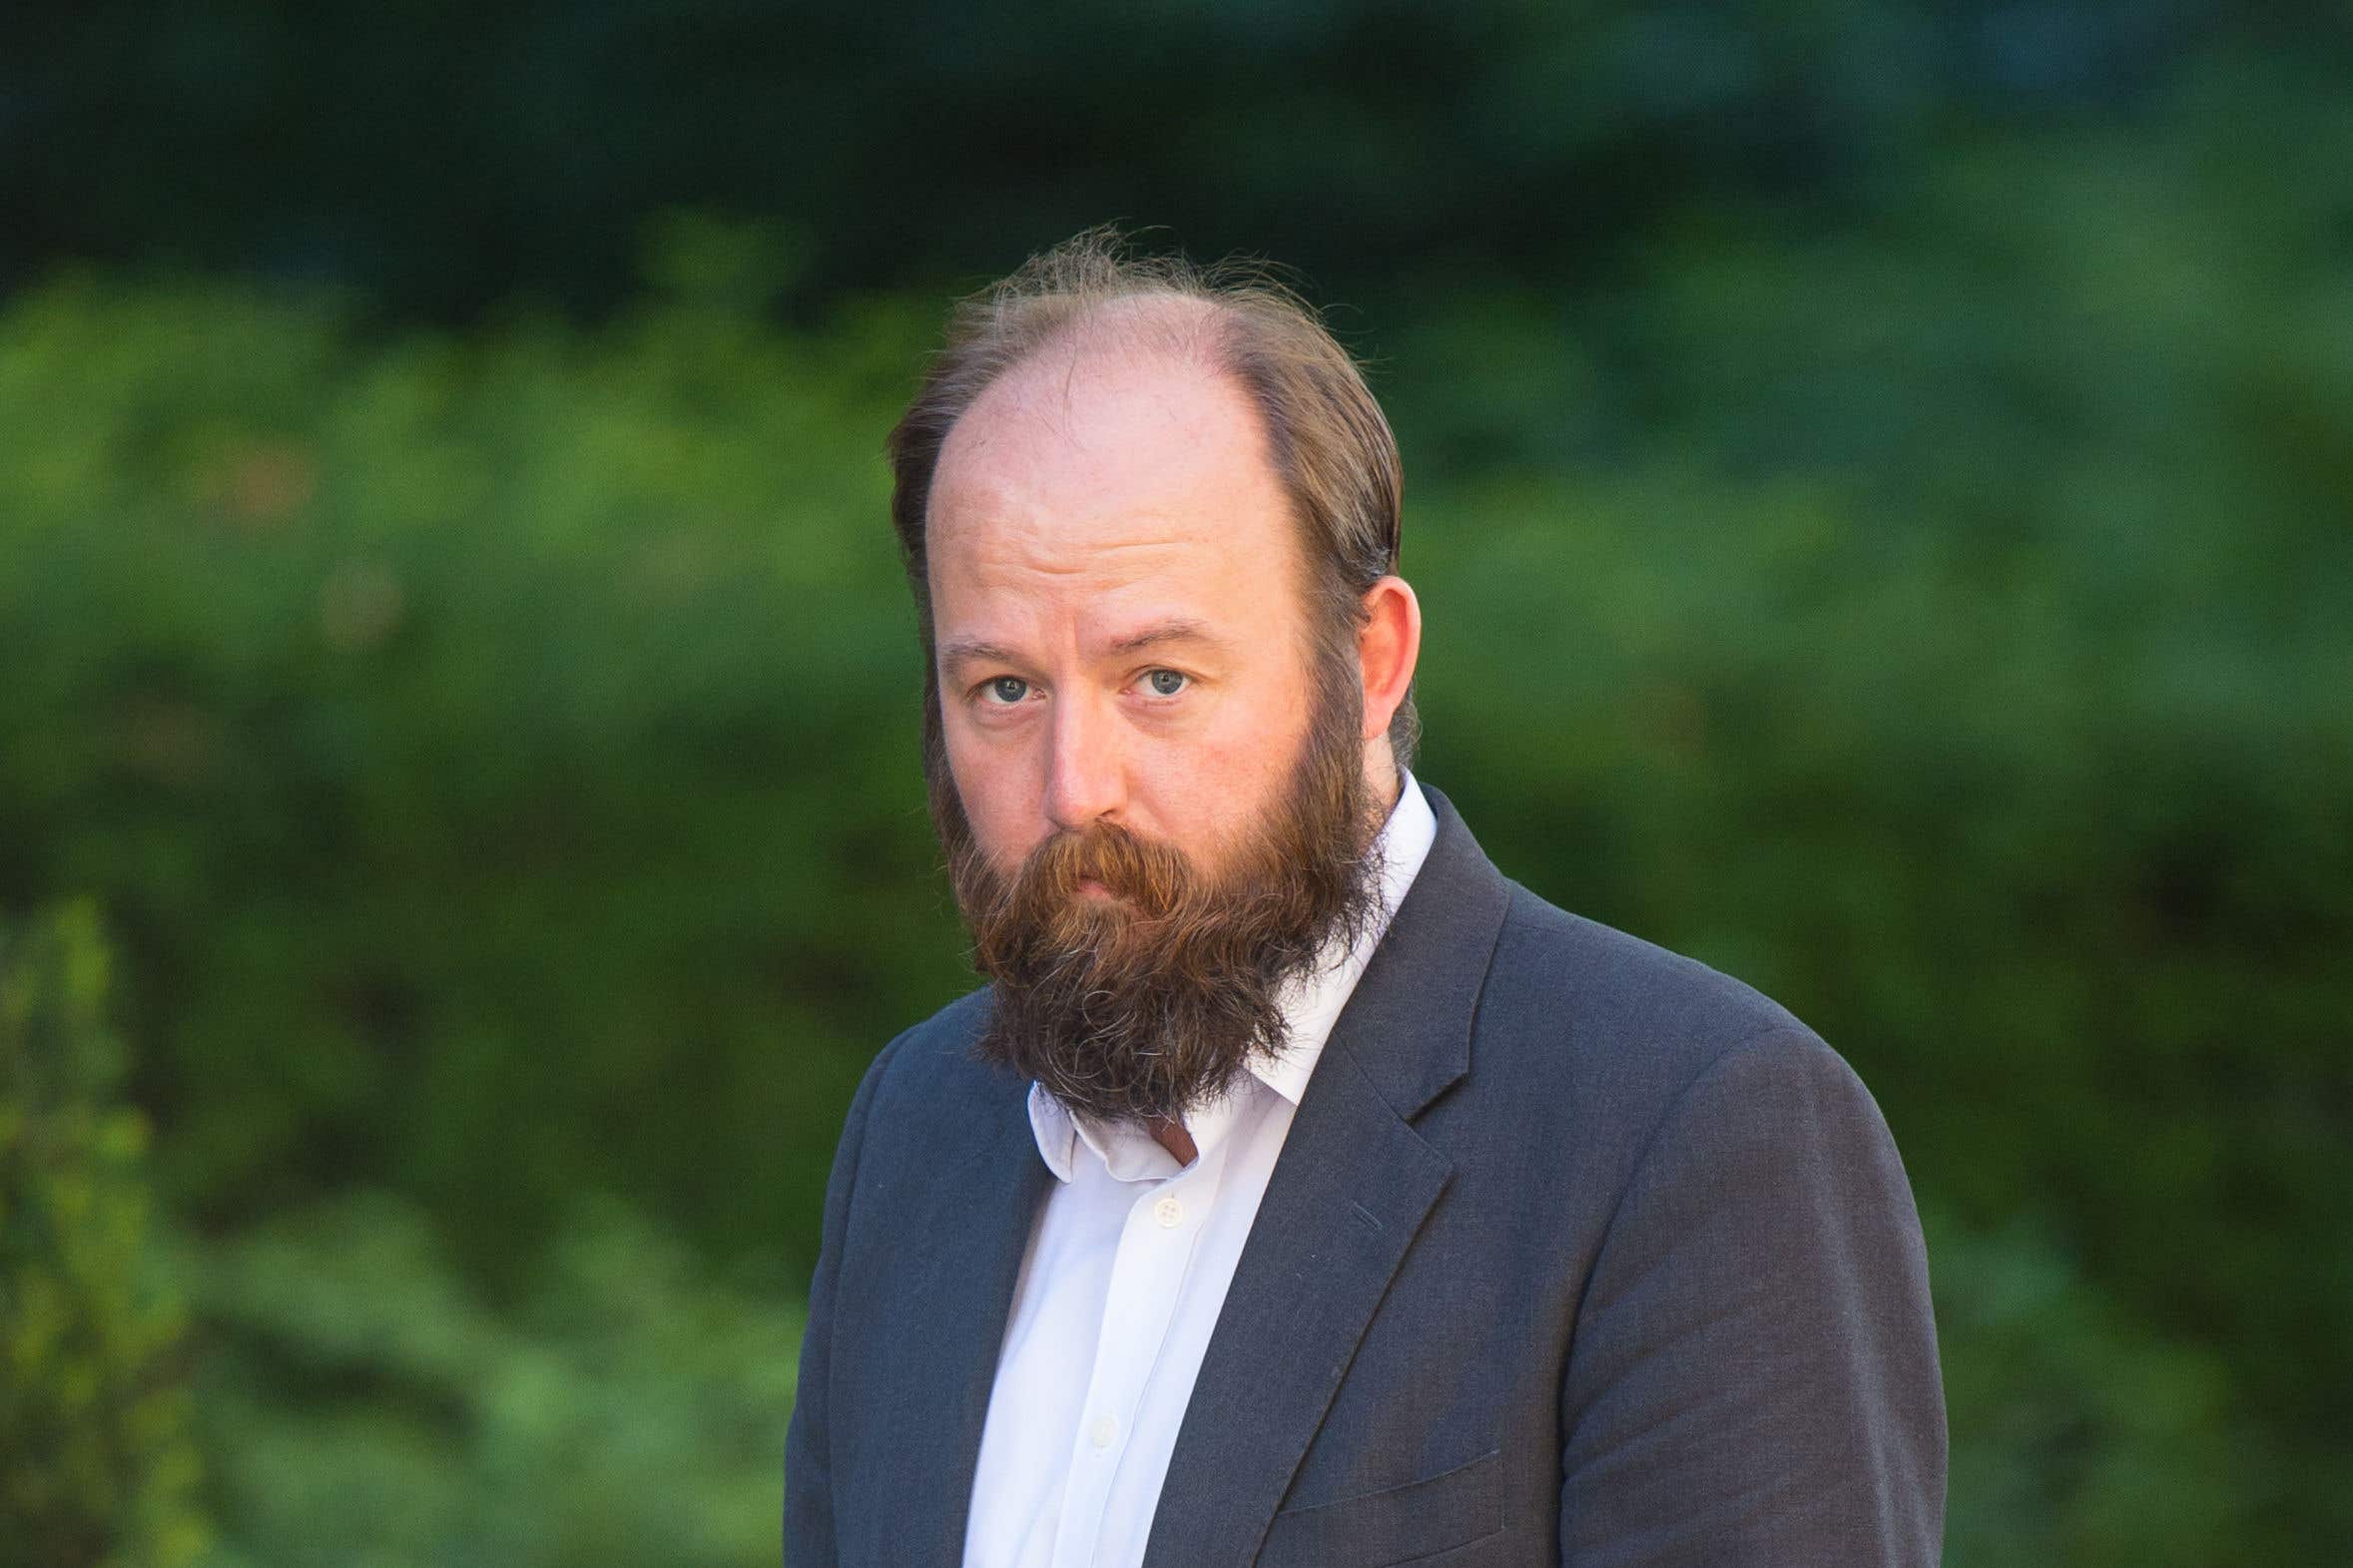 Theresa May’s former chief of staff Nick Timothy will be the Tory candidate in West Suffolk